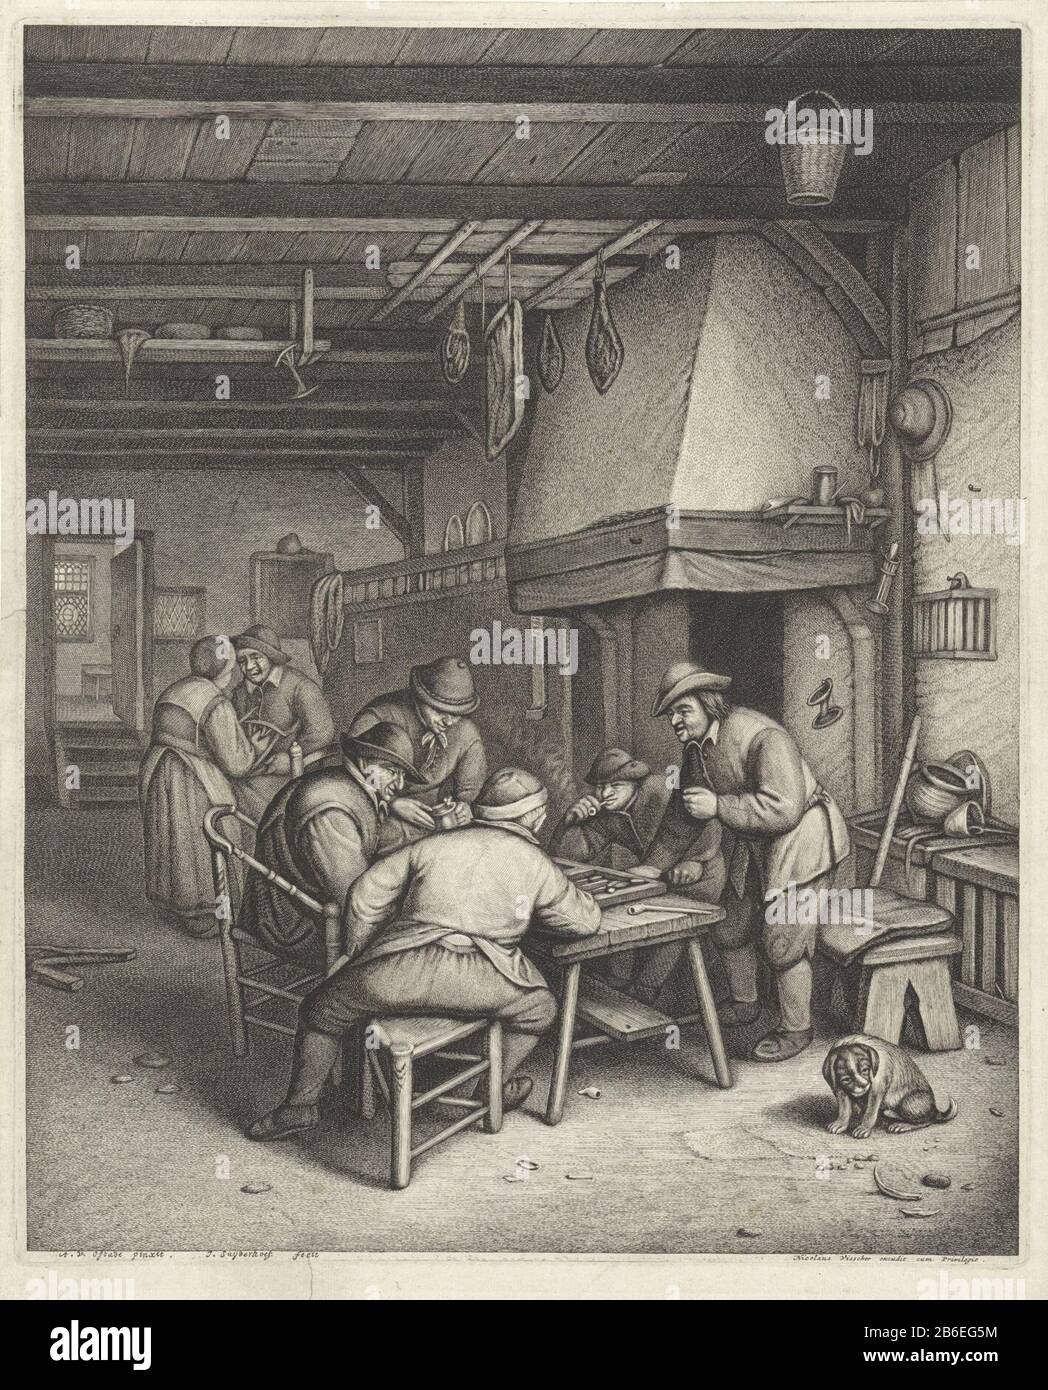 Boereninterieur with triktrakspelers Farmers play backgammon or backgammon a table with a fireplace. Right in the foreground a dog. In the background a man and a vrouw. Manufacturer : printmaker: Jonas Suyderhoef (listed property) to painting: Adriaen van Ostade (listed building) publisher: Nicolaes Visscher (I) (listed building) publisher: Nicolaes Visscher (II ) (shown on object) provider of privilege: unknown (indicated on object) Dating: ca. 1623 - 1686 Physical characteristics: engra material: paper Technique: engra (printing process) Measurements: plate edge: h 343 mm × W 280 mm Subject: Stock Photo